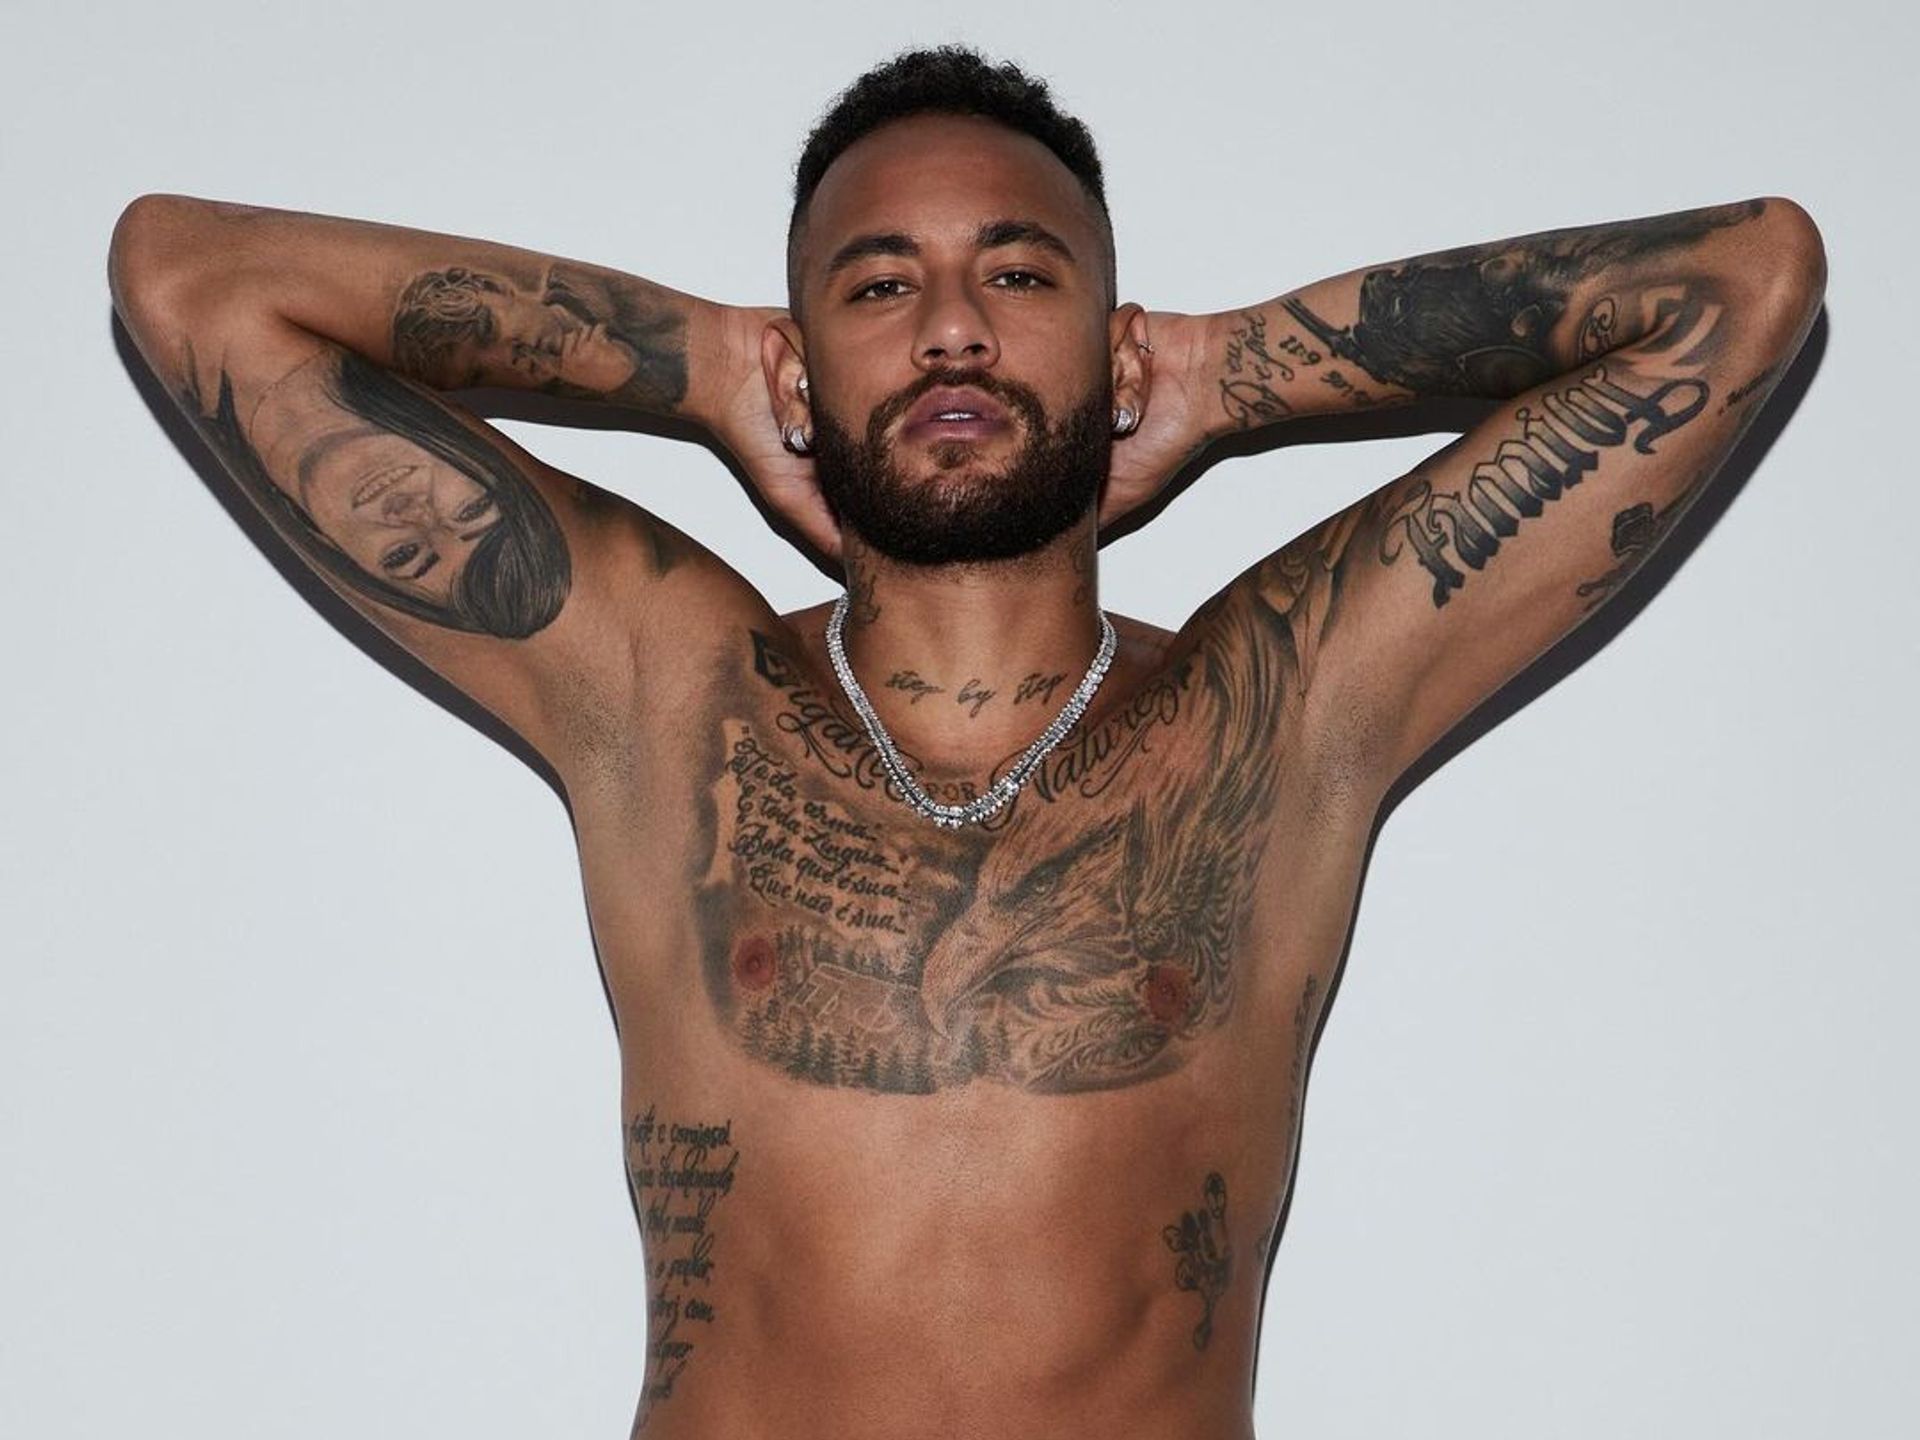 Neymar Jr. bares all for Skims menswear: Here's what to add to cart  according to a fashion editor